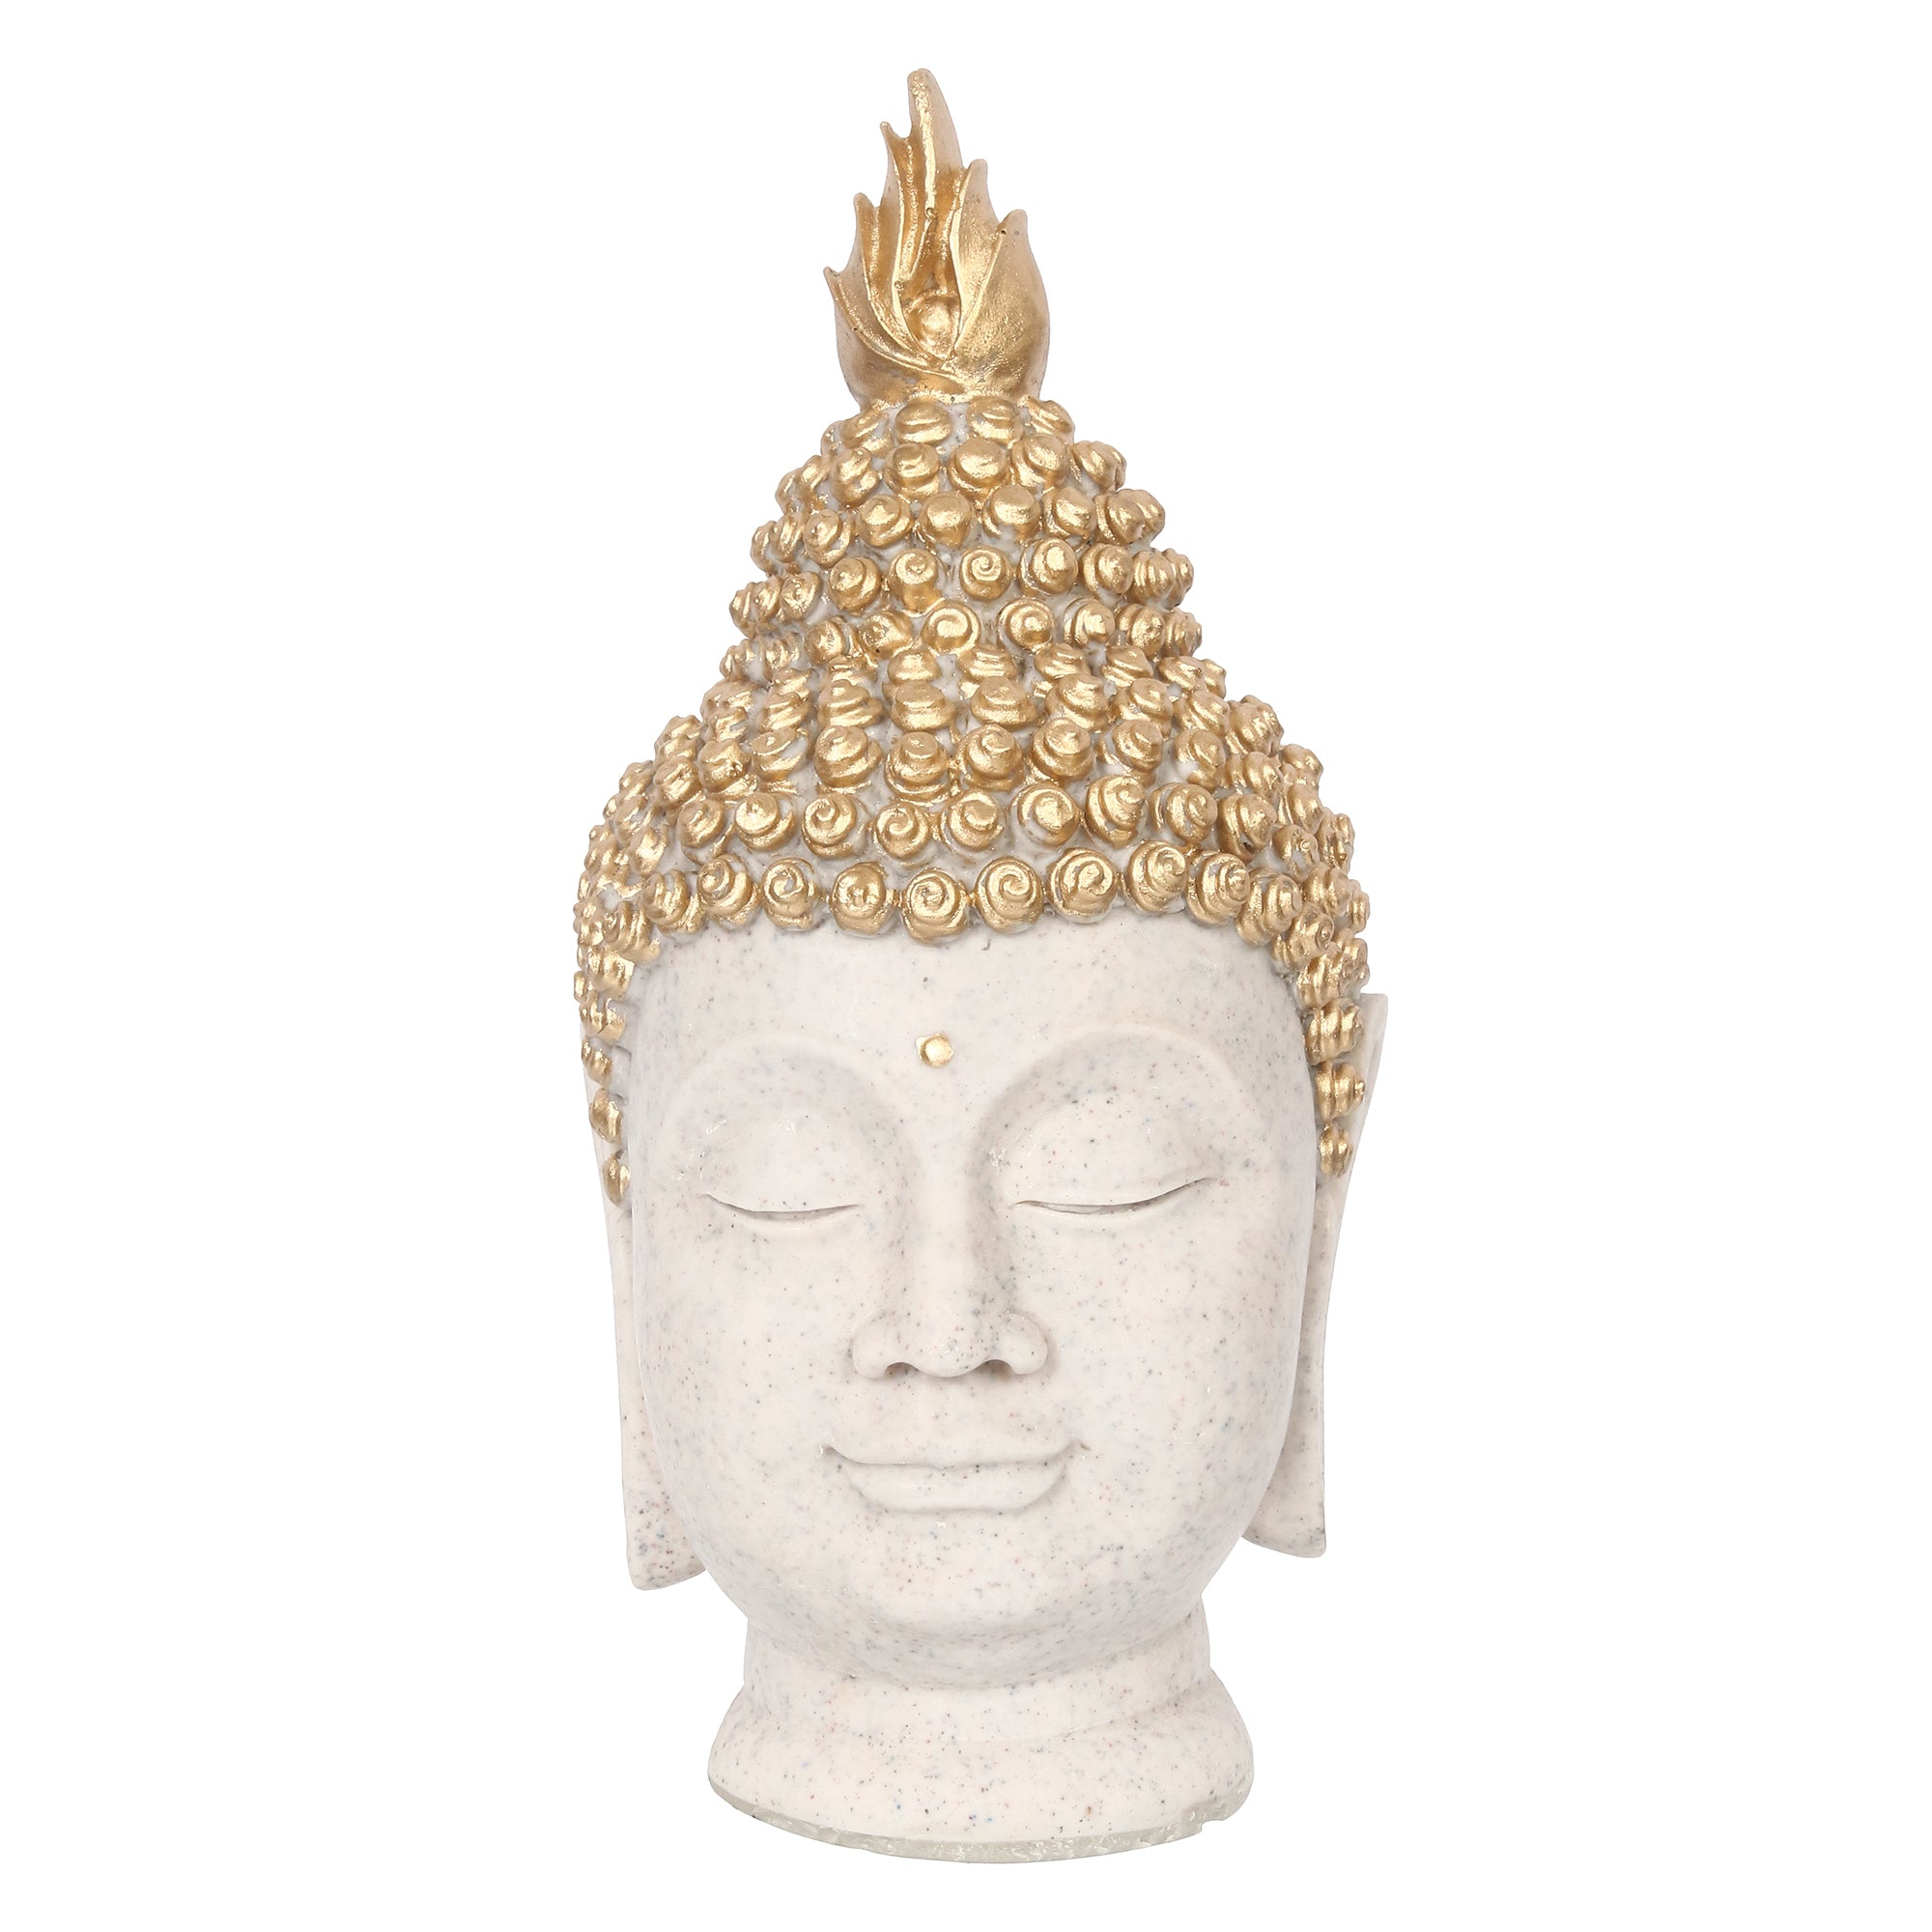 Polyresin Gold and White Meditating Buddha Head Statue 1